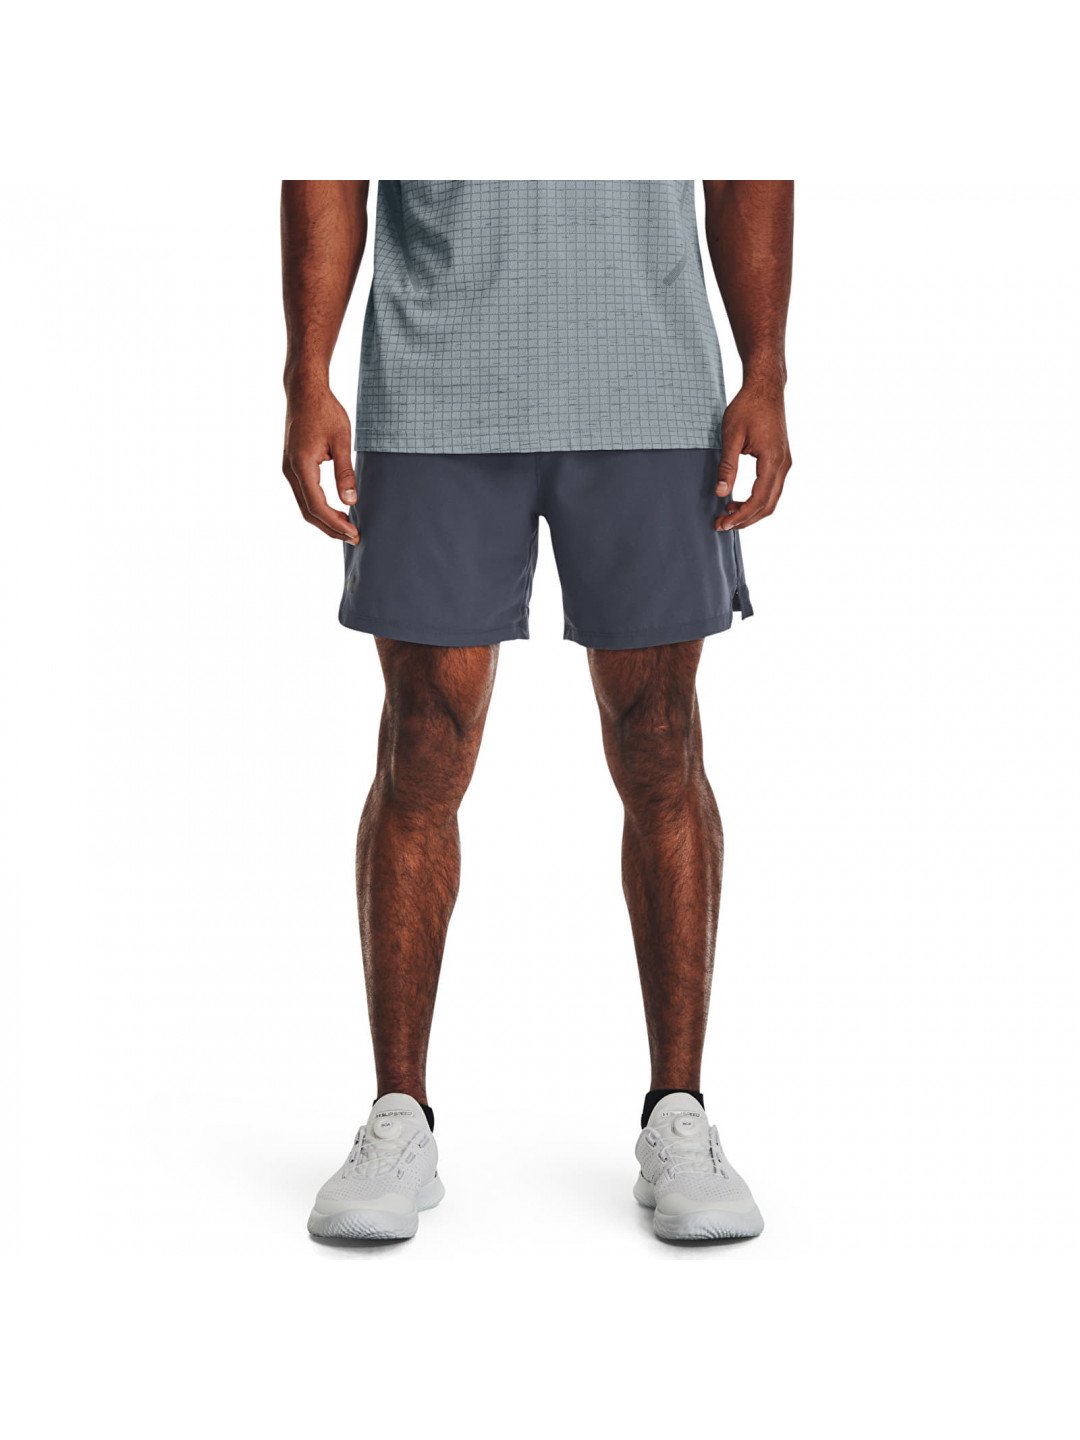 Under Armour Vanish Woven 6In Shorts Downpour Gray